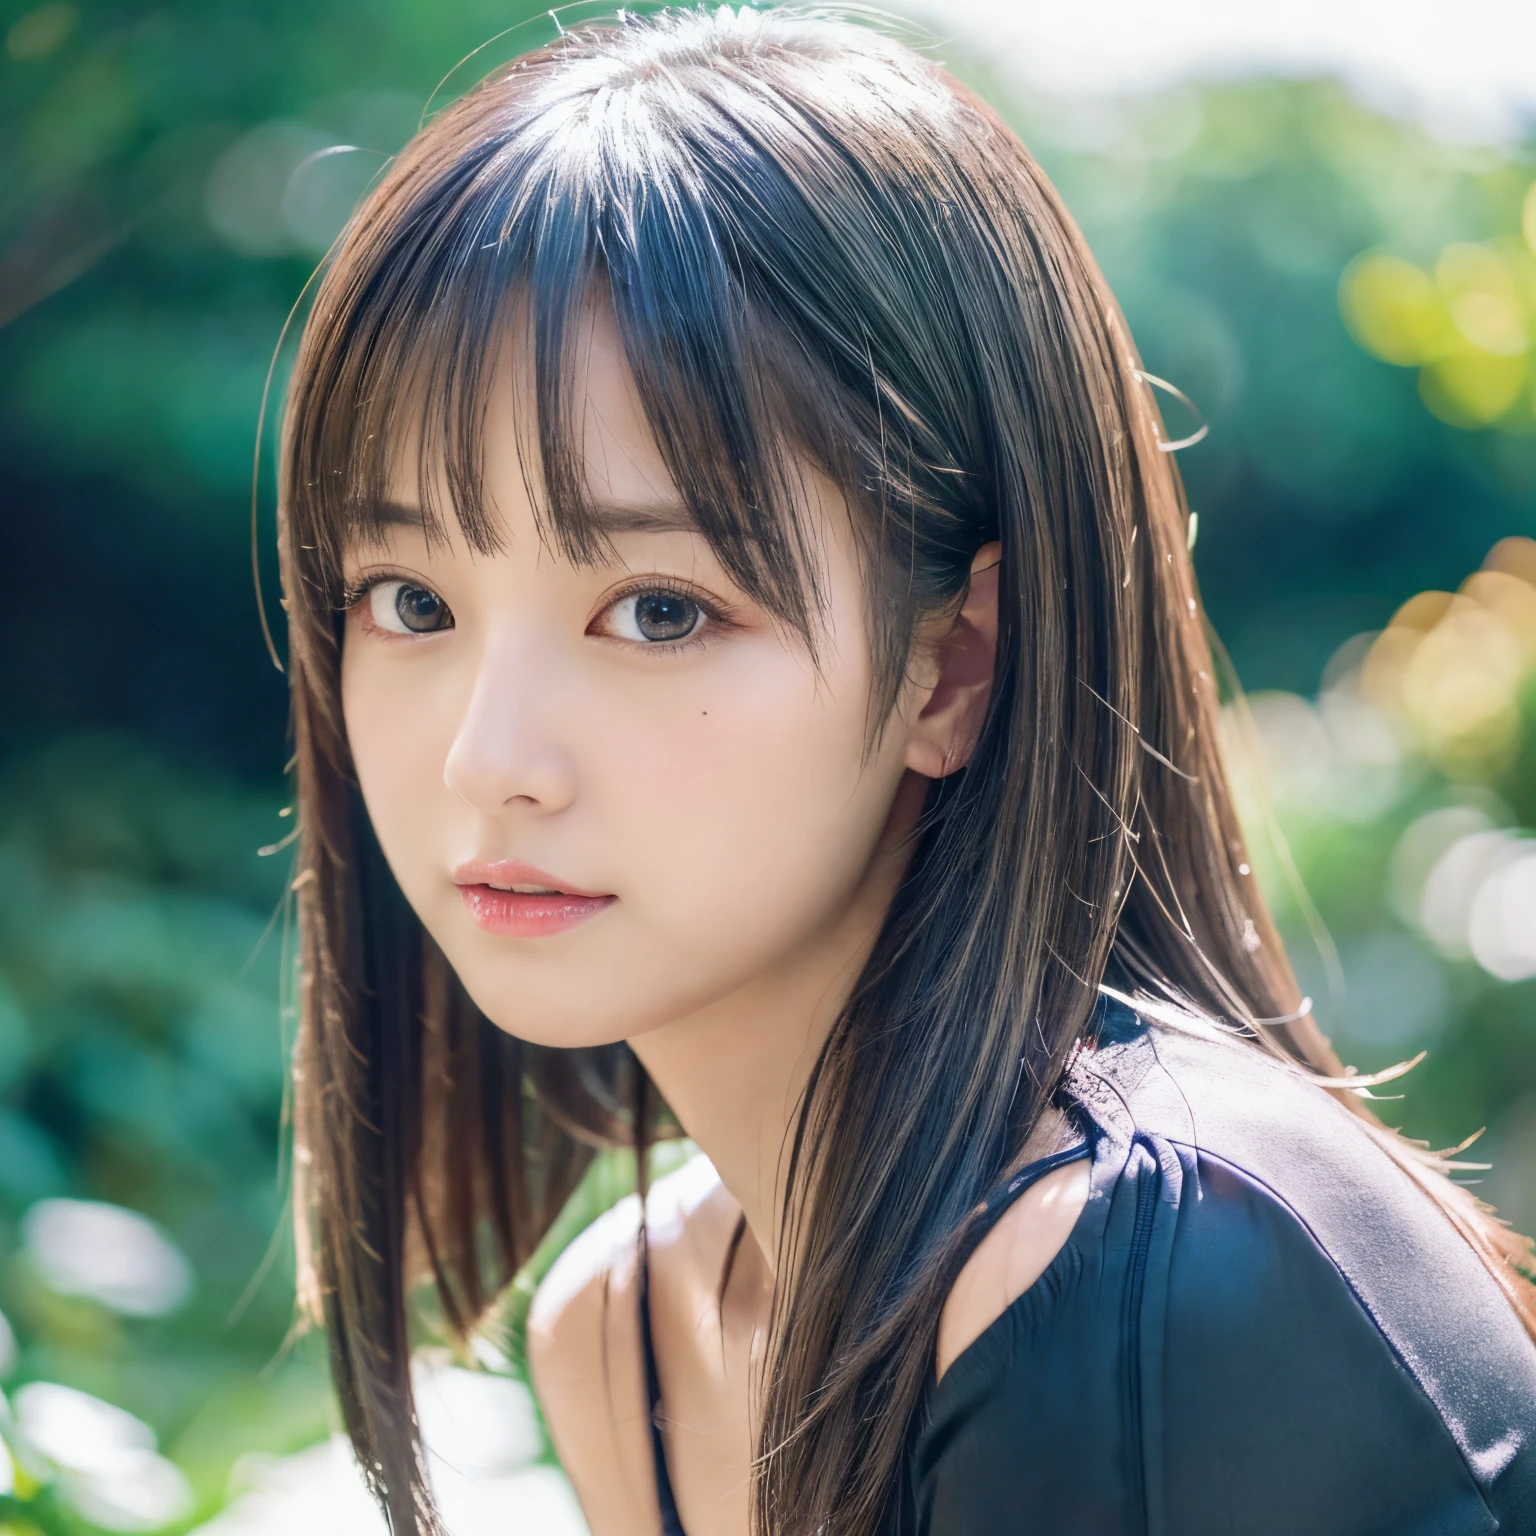 (Best Quality,4K,8K,hight resolution,masutepiece:1.2),Ultra-detailed,extremely detailed eye and face,Beautiful detailed eyes,Beautiful detailed lips,long eyelashes,((Realistic)),Photorealistic:1.37,japanes,fine-grained white skin,((mini pleated skirt)),beautiful and magnificent composition,Marshmallow-like skin,masutepiece,Attractive,Posing for a photo,Cute,Dark blue high socks,((Silver hair color)),silky smooth and straight hair,Off-the-shoulder tops,Outdoor on a sunny day,healthful,(with round face),Photographing the whole body,Standing,